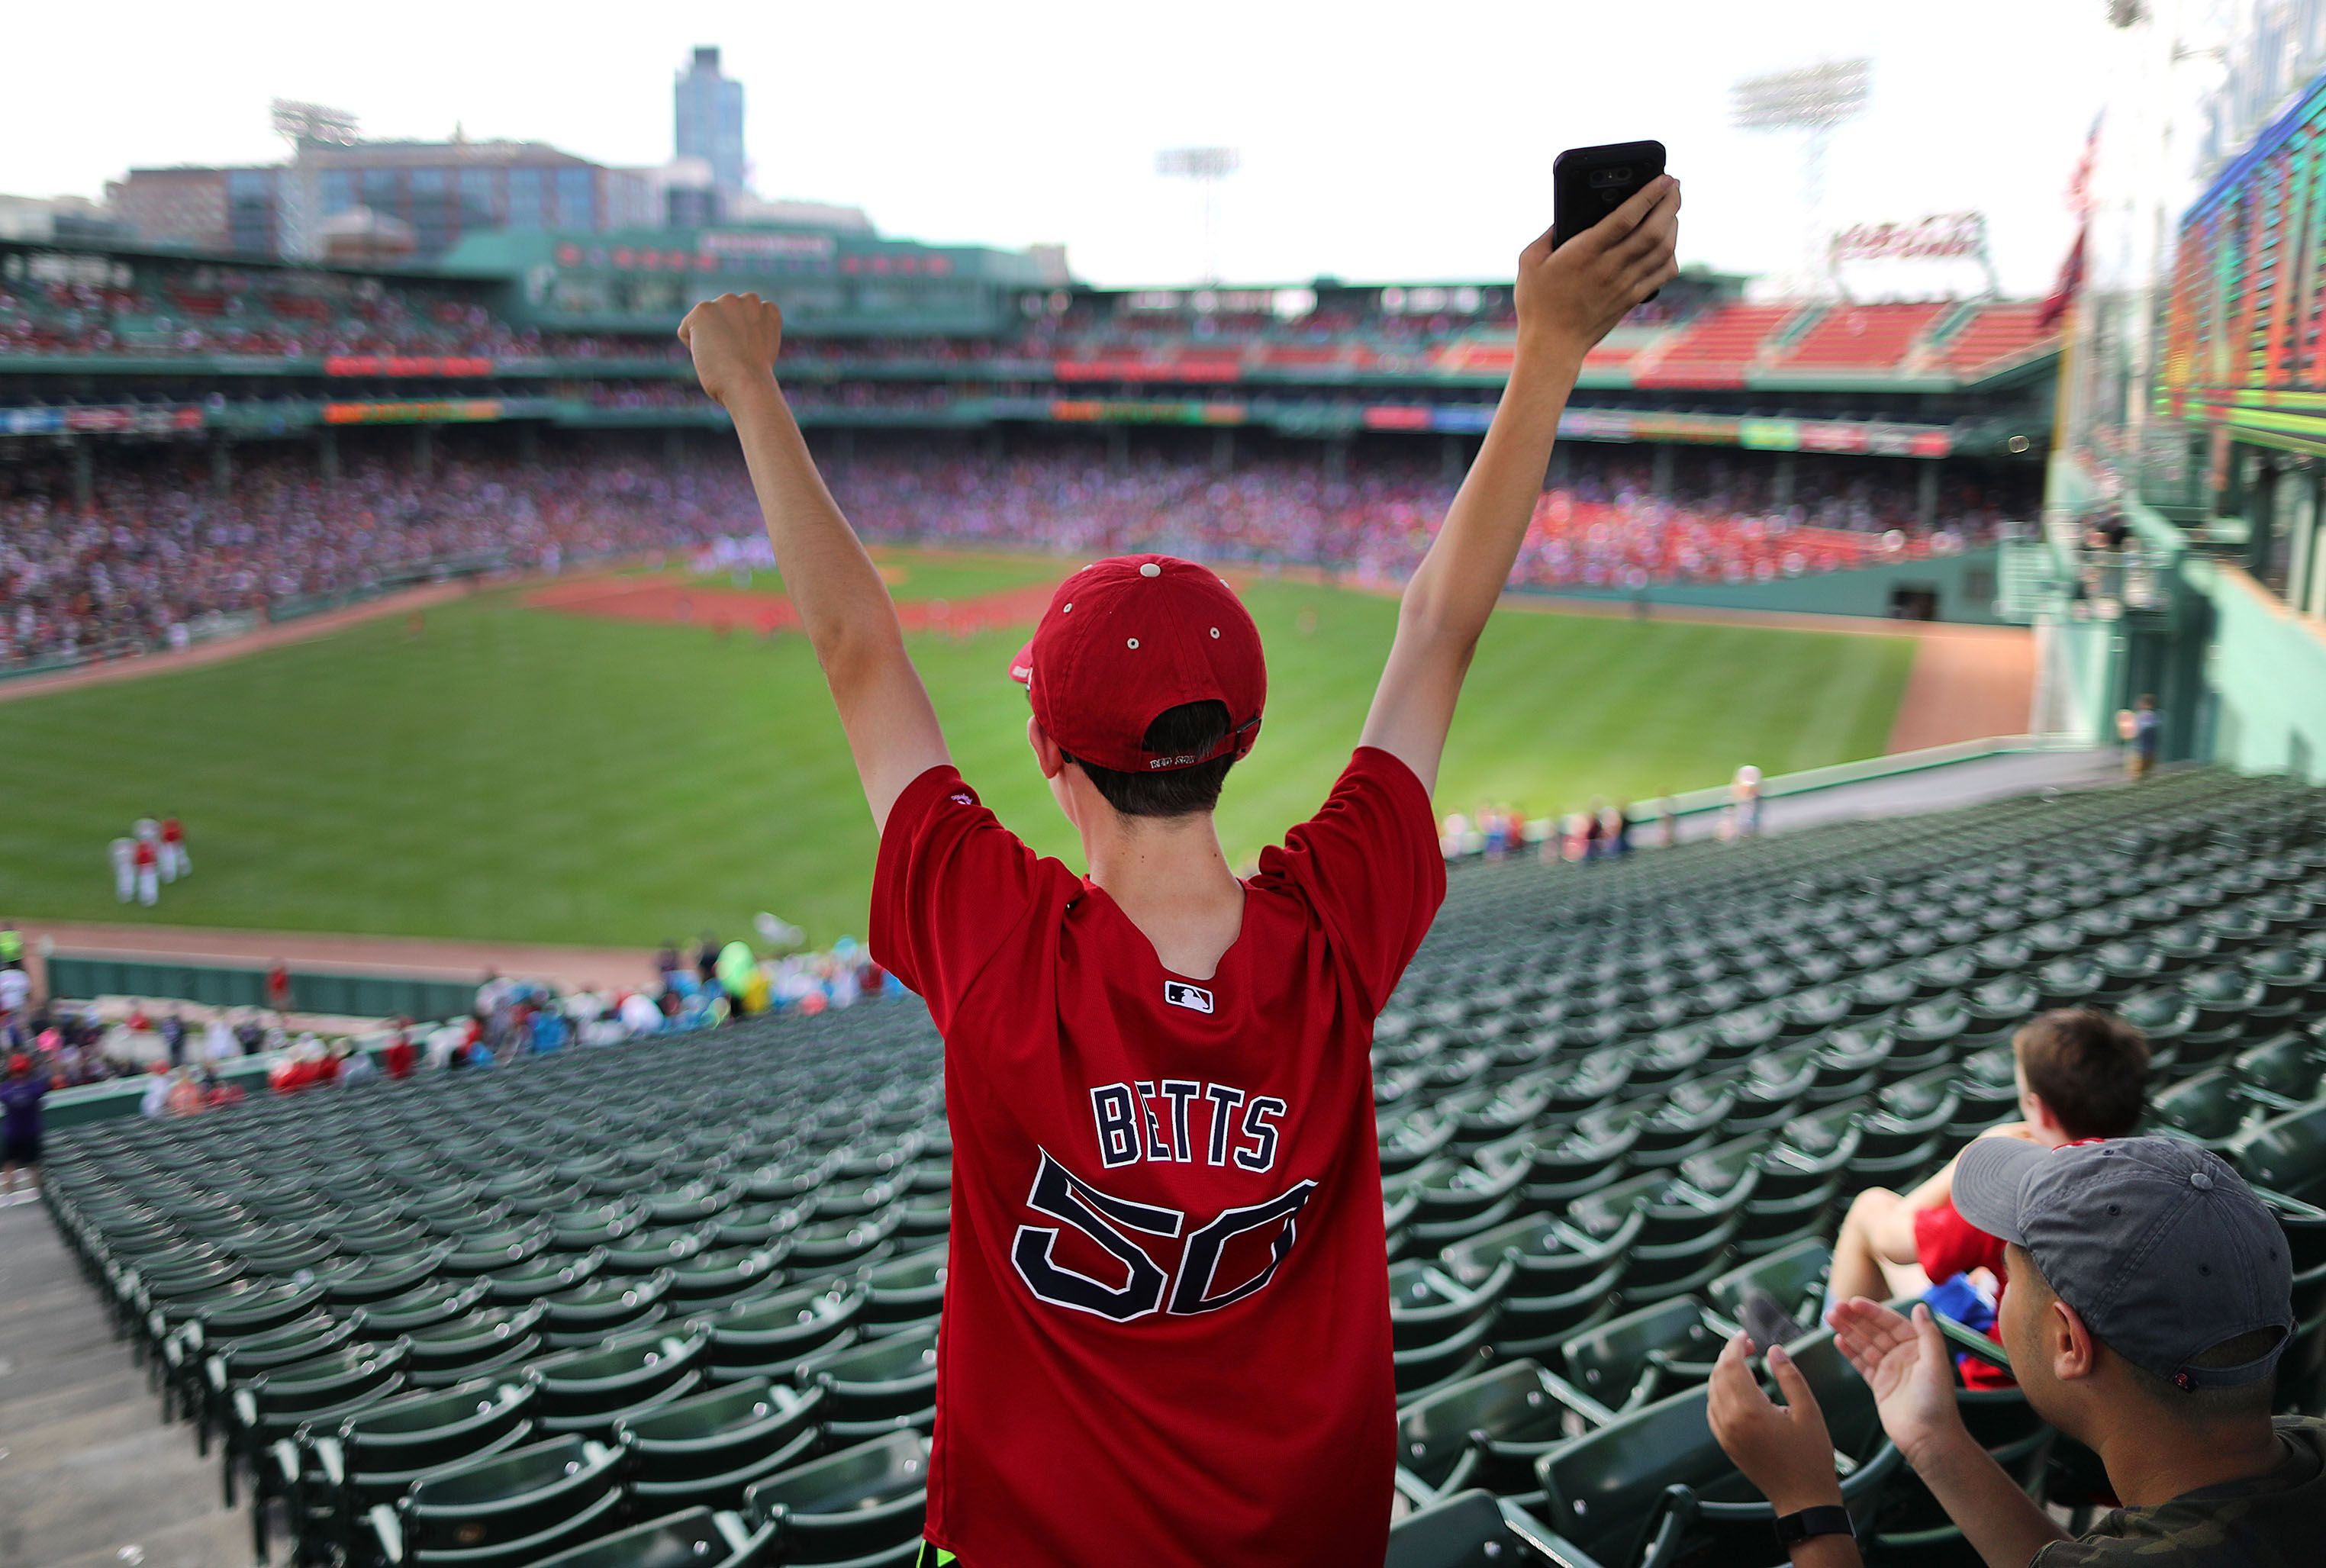 $5 tickets, $1 dogs, and 12 minutes of play: Red Sox fans relished this day  at the ballpark - The Boston Globe